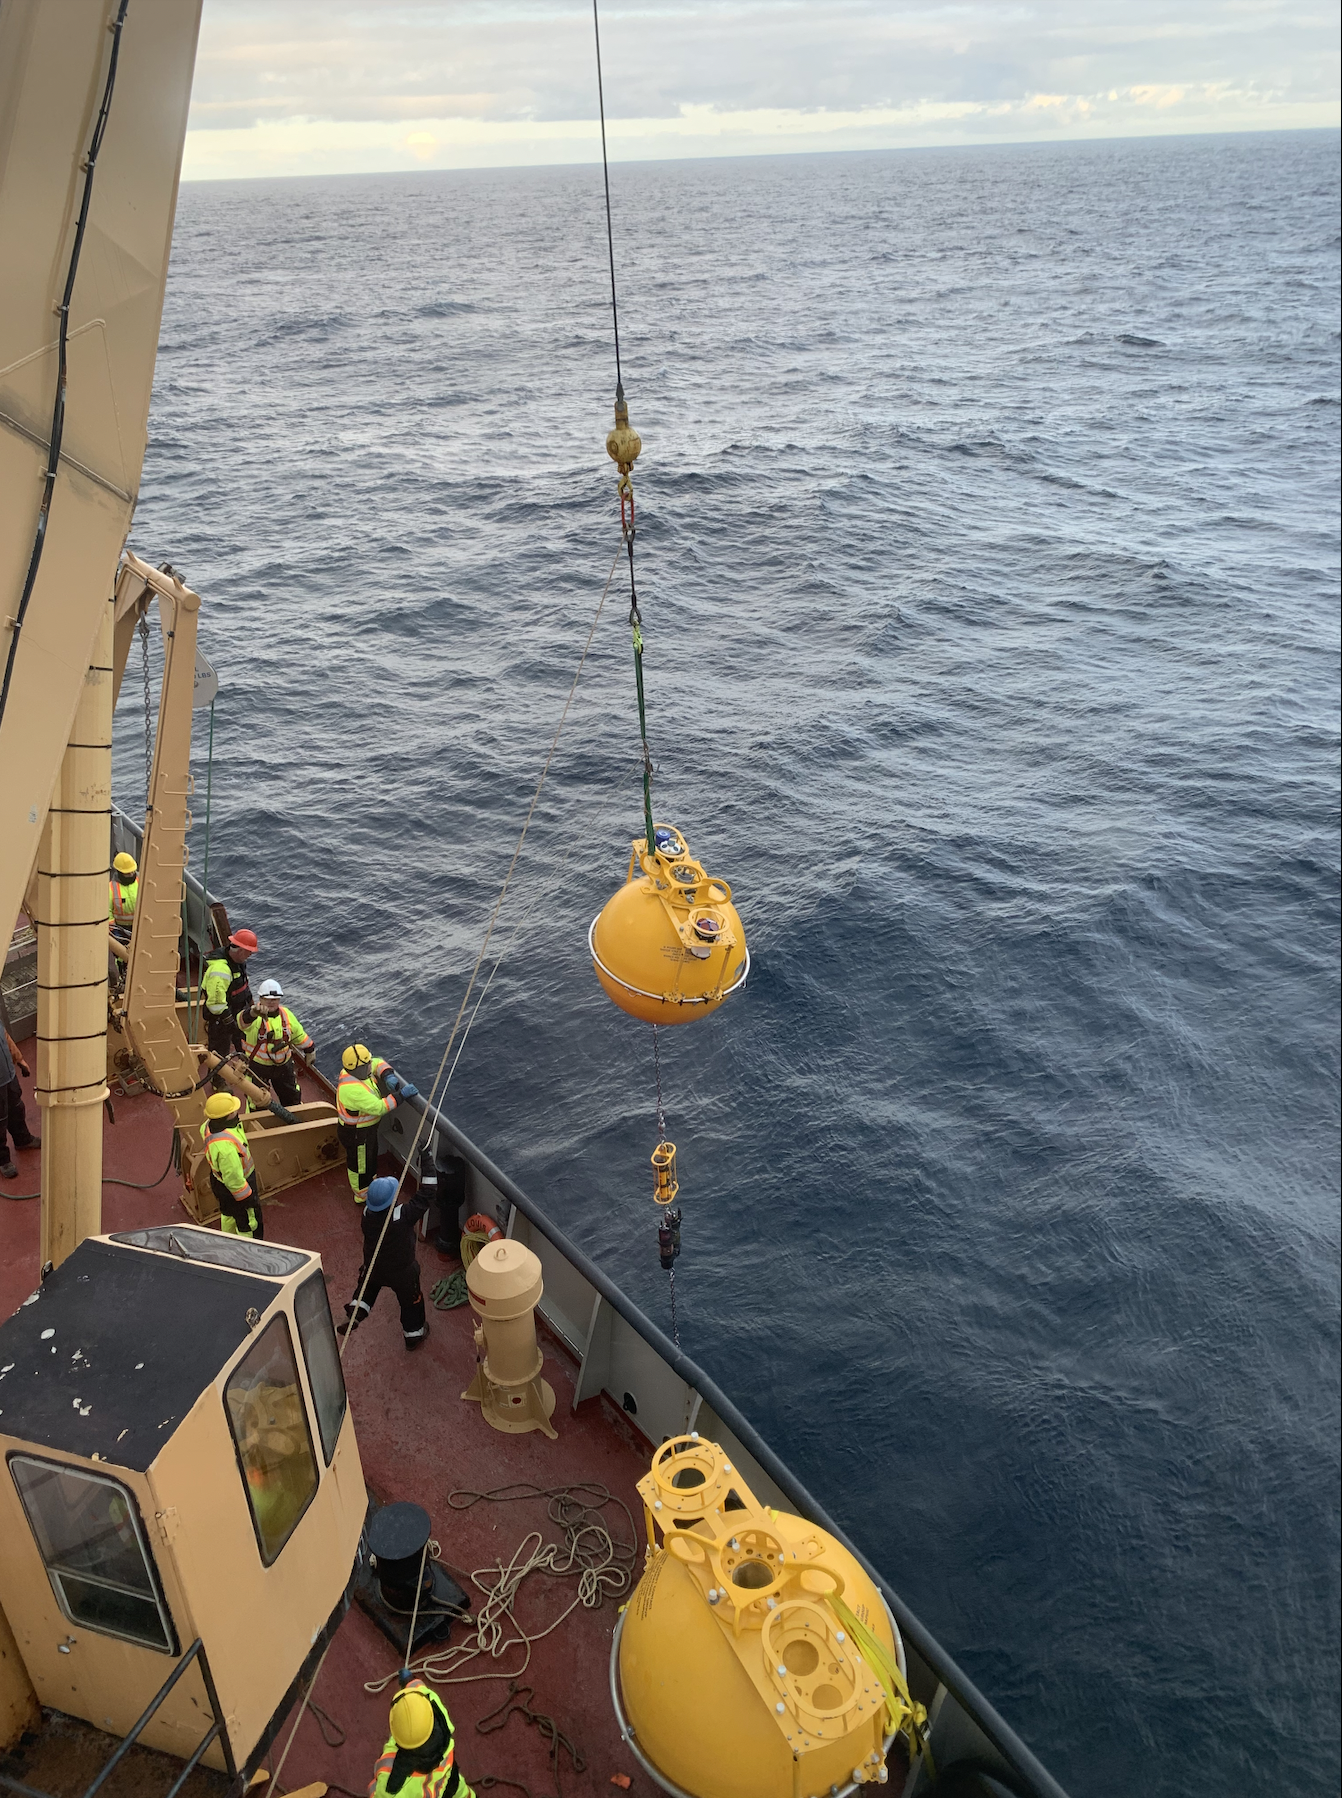 The surface buoy being lowered into the water. (The final step!)